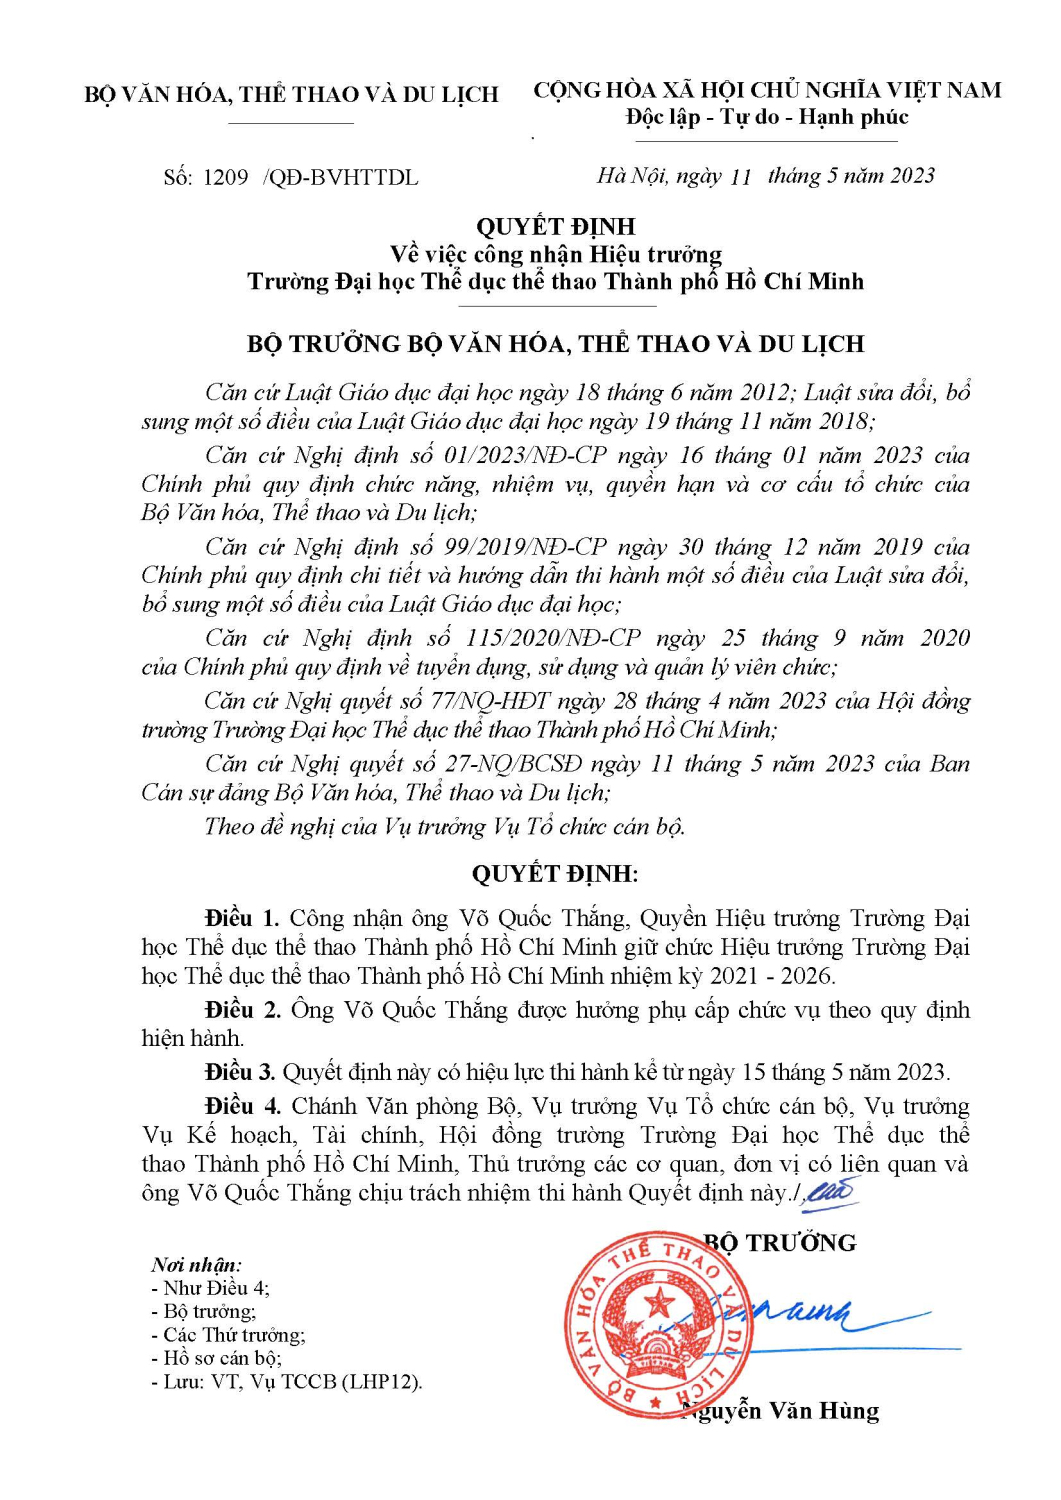 QD cong nhan Hieu truong Truong DH TDTT TPHCM (Vo Quoc Thang) Page 1